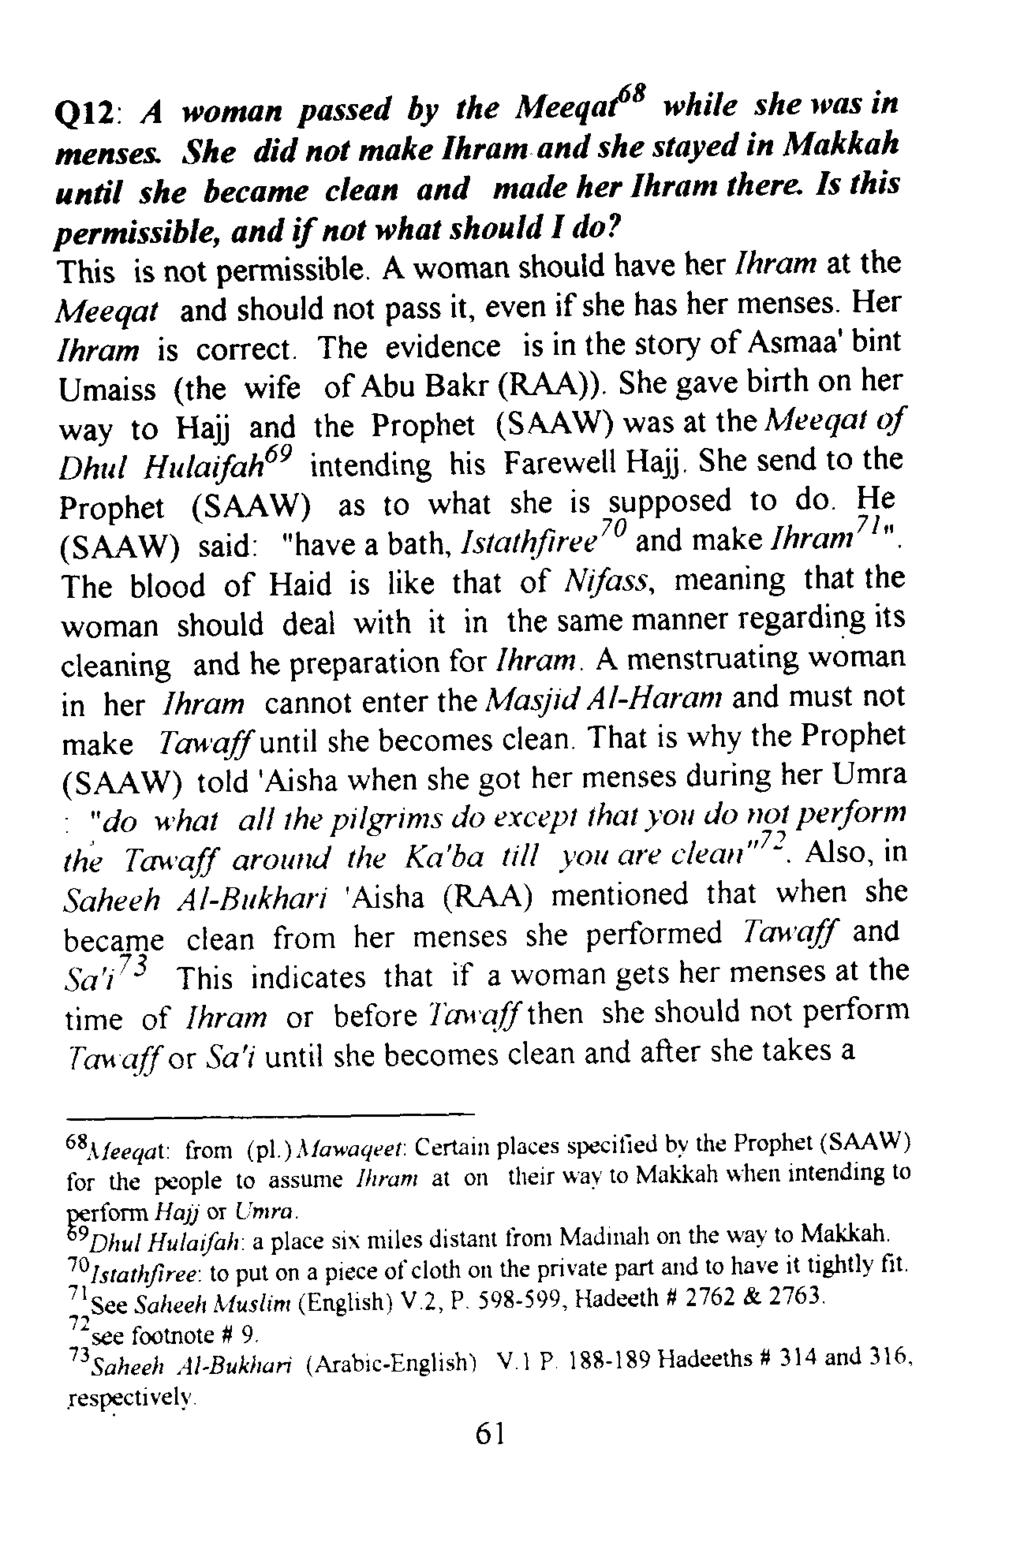 Ql2: A woman passed by the Meeqa{E while she wss in menses She did not make lhram snd she stayed in Makkah until she became clesn and msde her lhrom there' Is this permissible, and if not what should